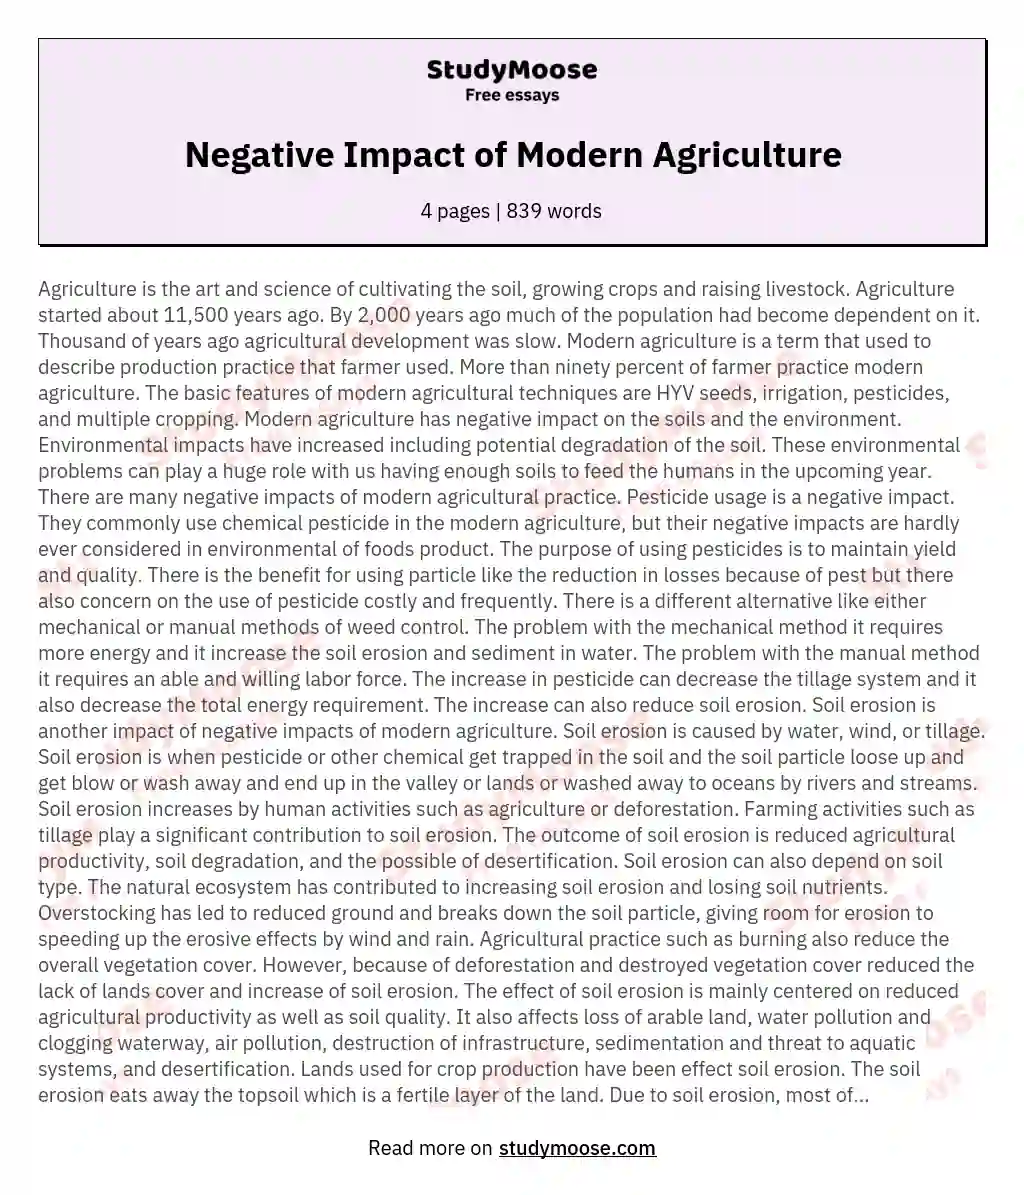 Negative Impact of Modern Agriculture